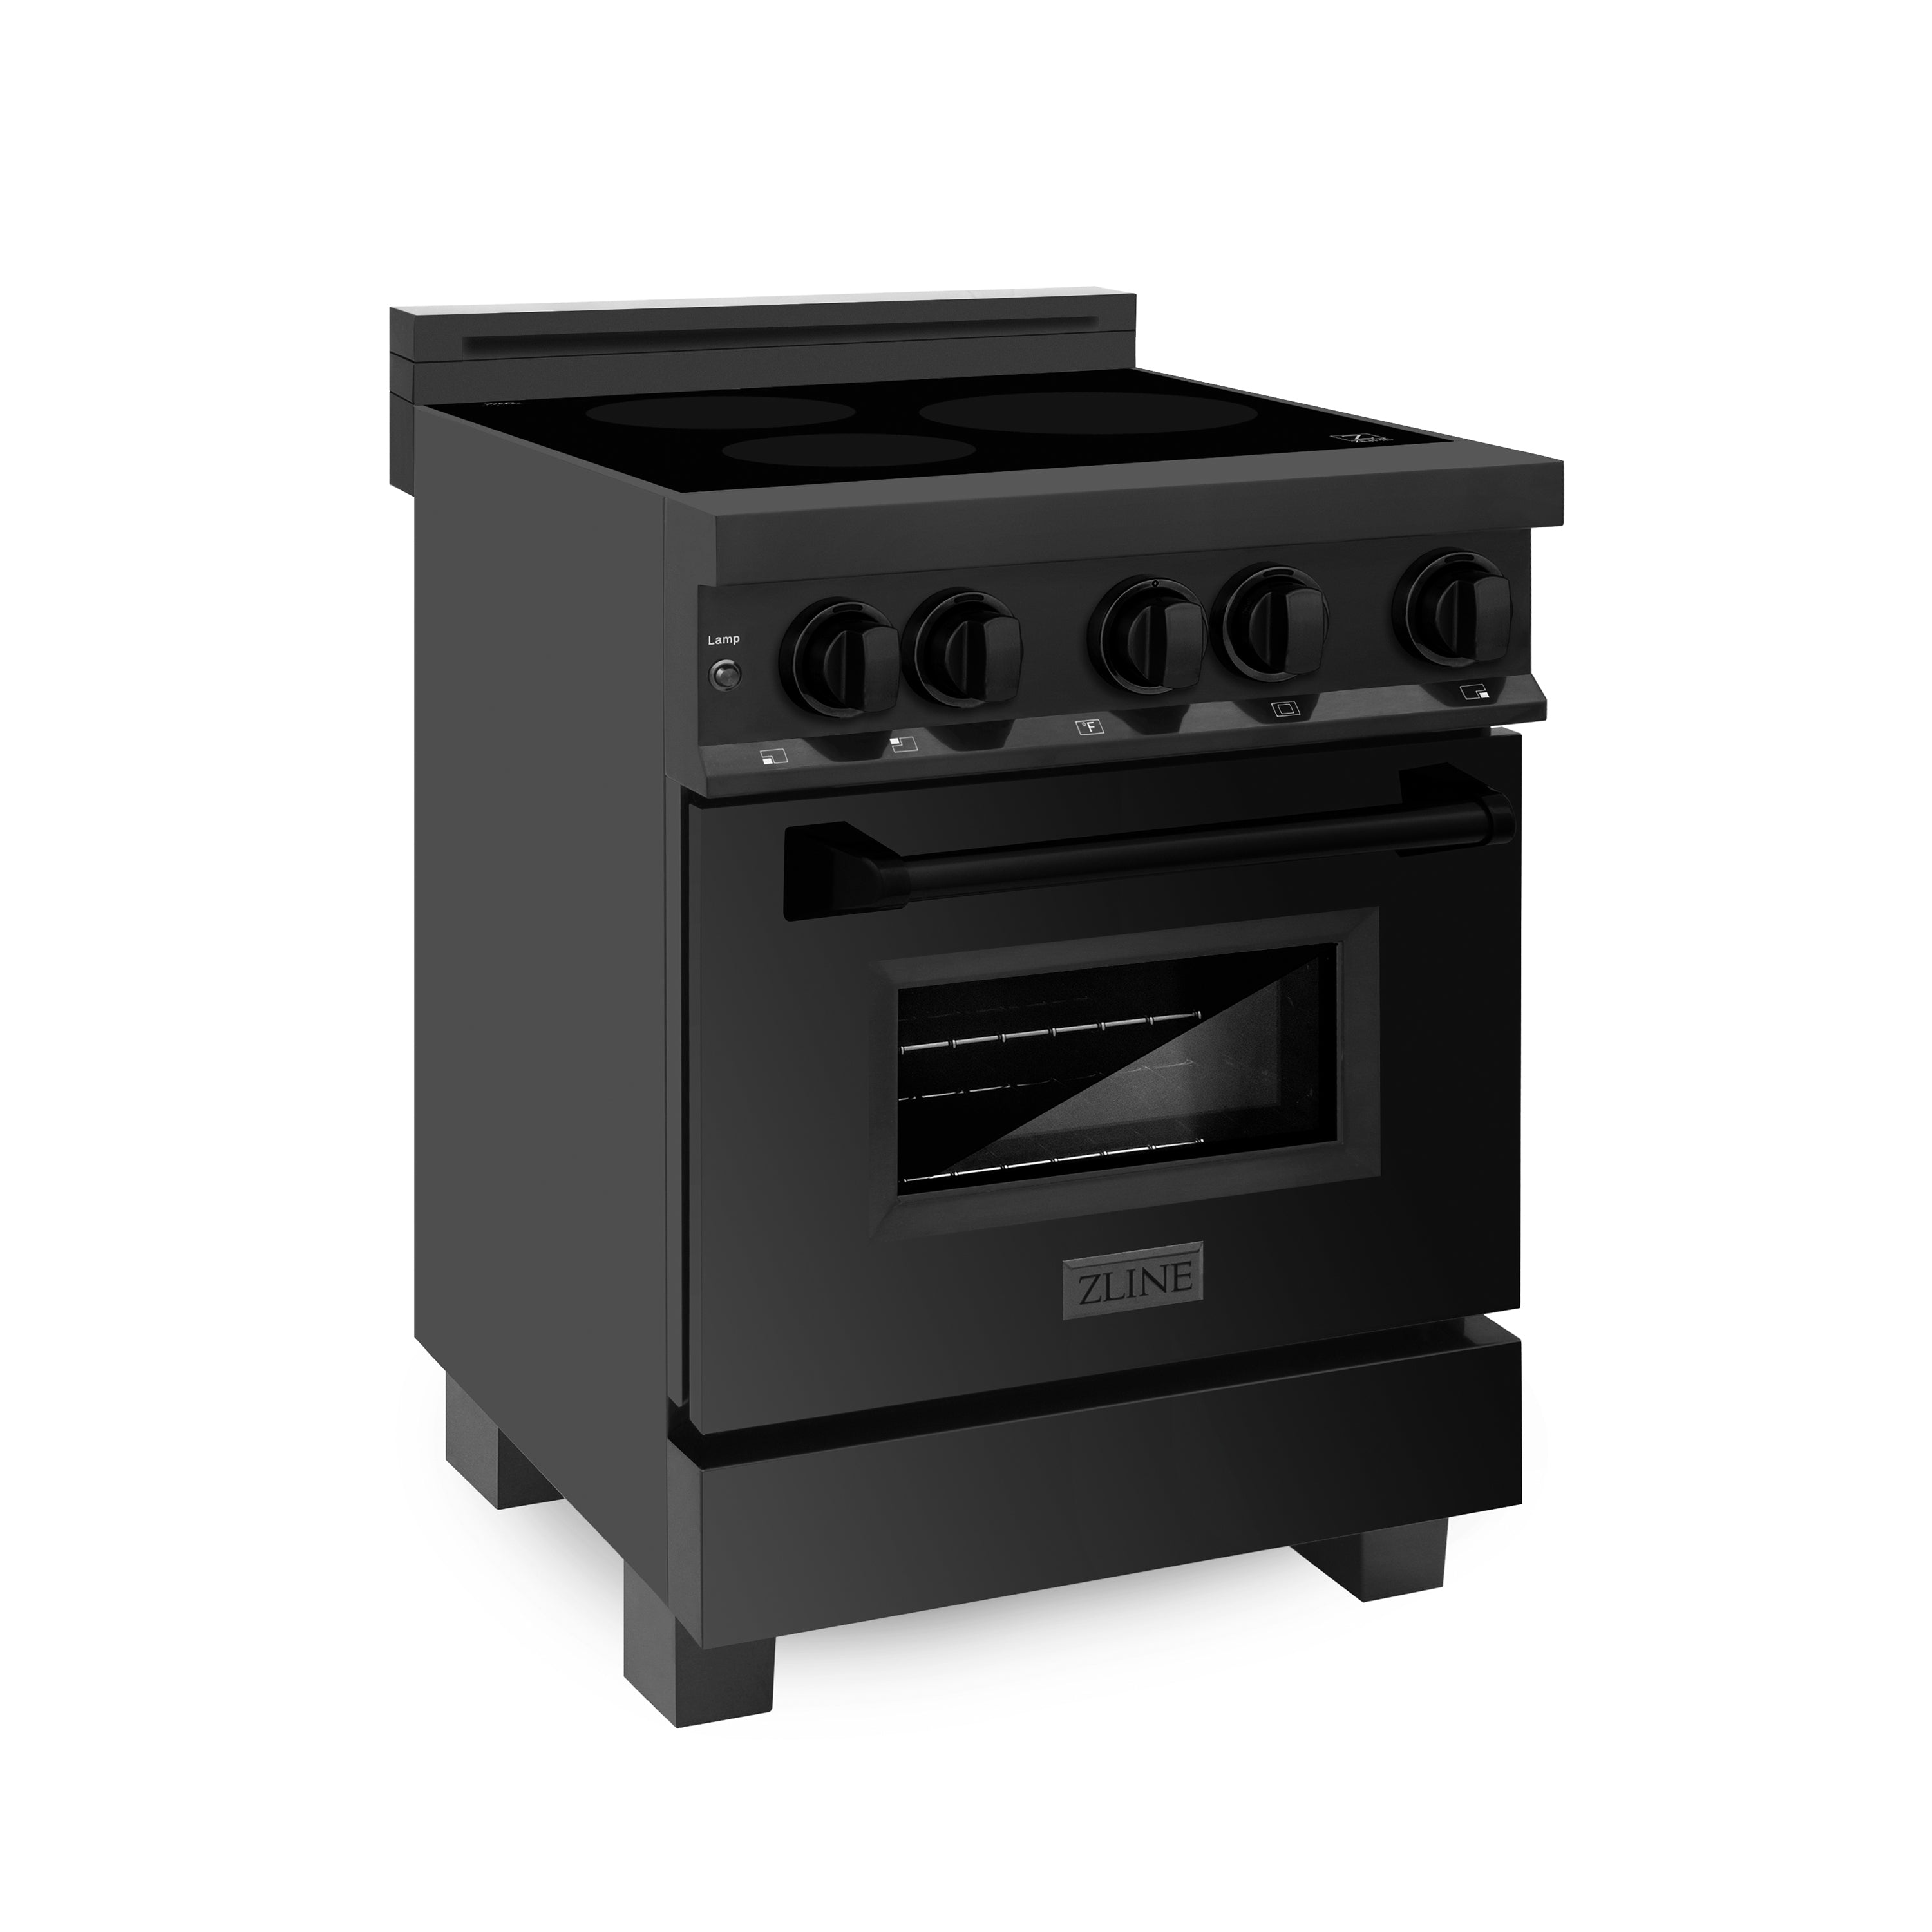 ZLINE 24" 2.8 cu. ft. Induction Range with a 3 Element Stove and Electric Oven in Black Stainless Steel (RAIND-BS-24)